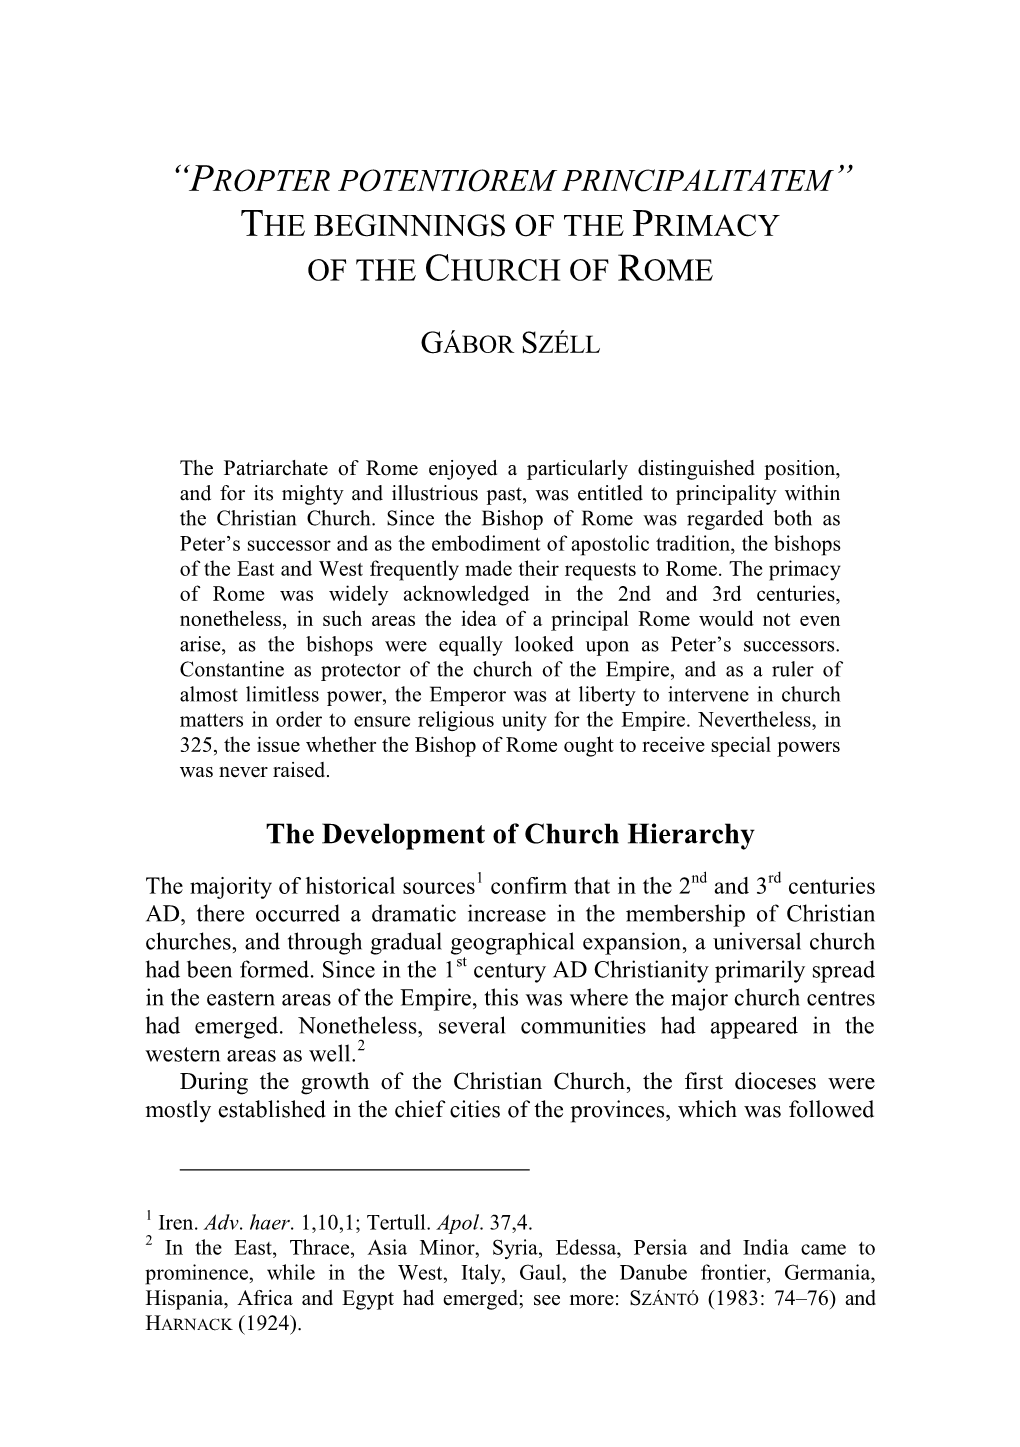 Propter Potentiorem Principalitatem” the Beginnings of the Primacy of the Church of Rome